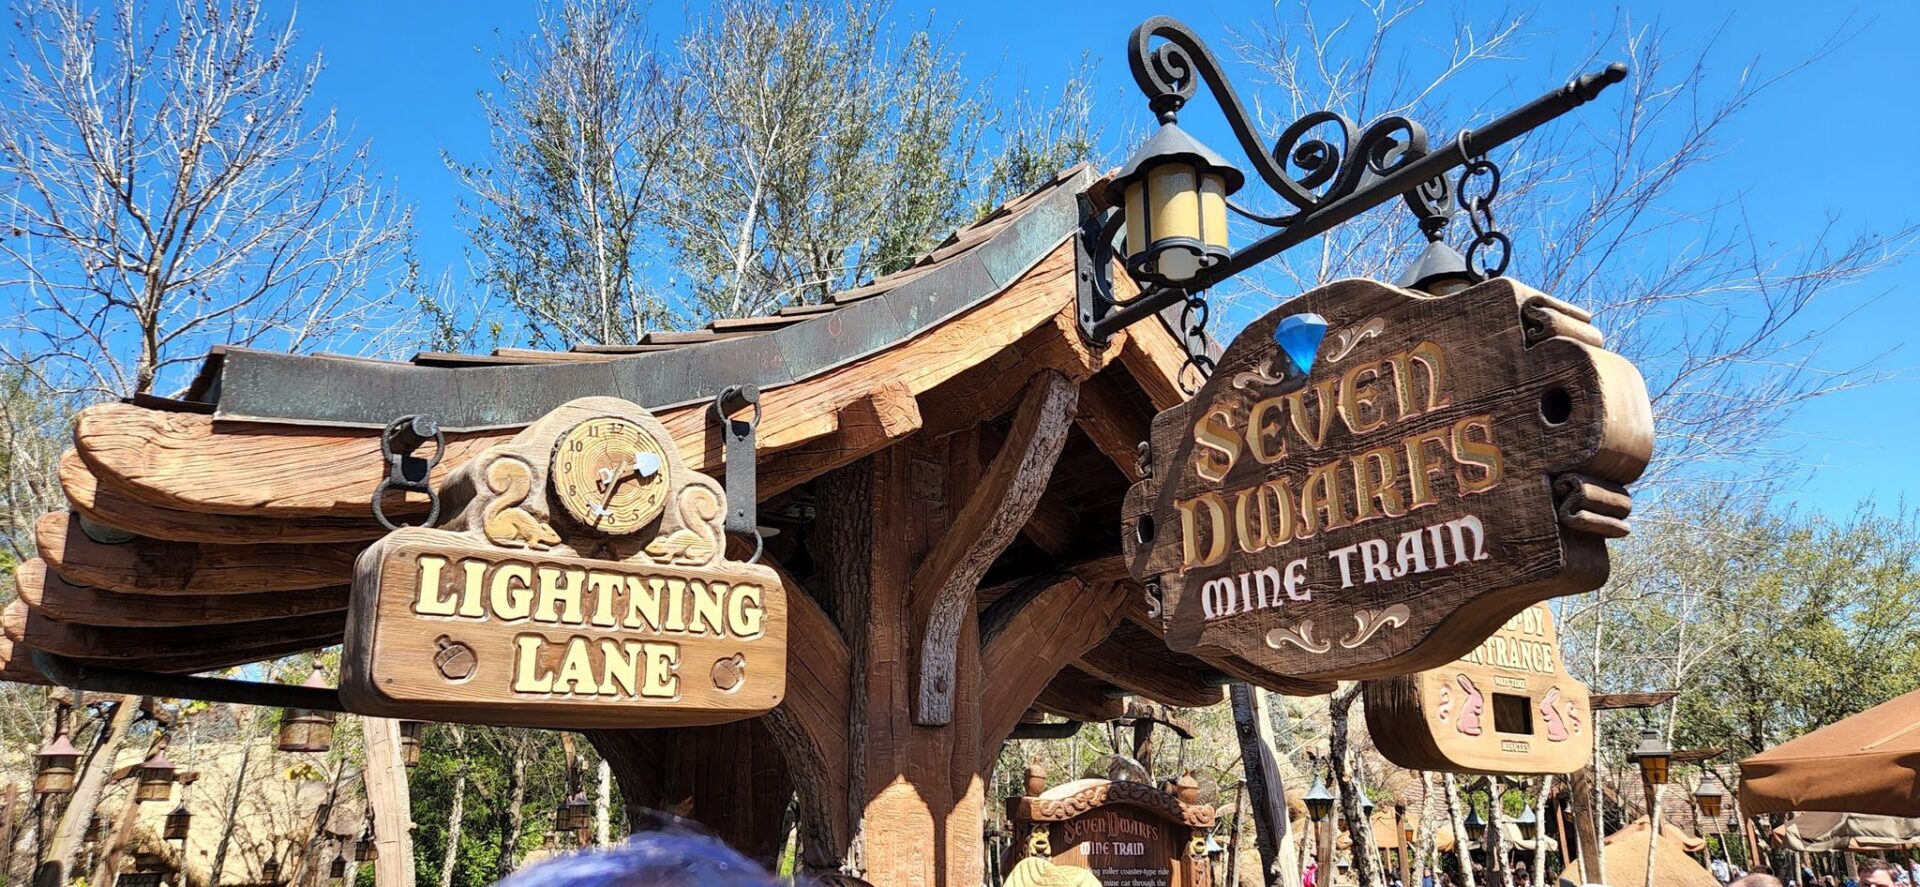 Florida Woman Arrested for Battery of Elderly Guest While in Line at Seven Dwarfs Mine Train